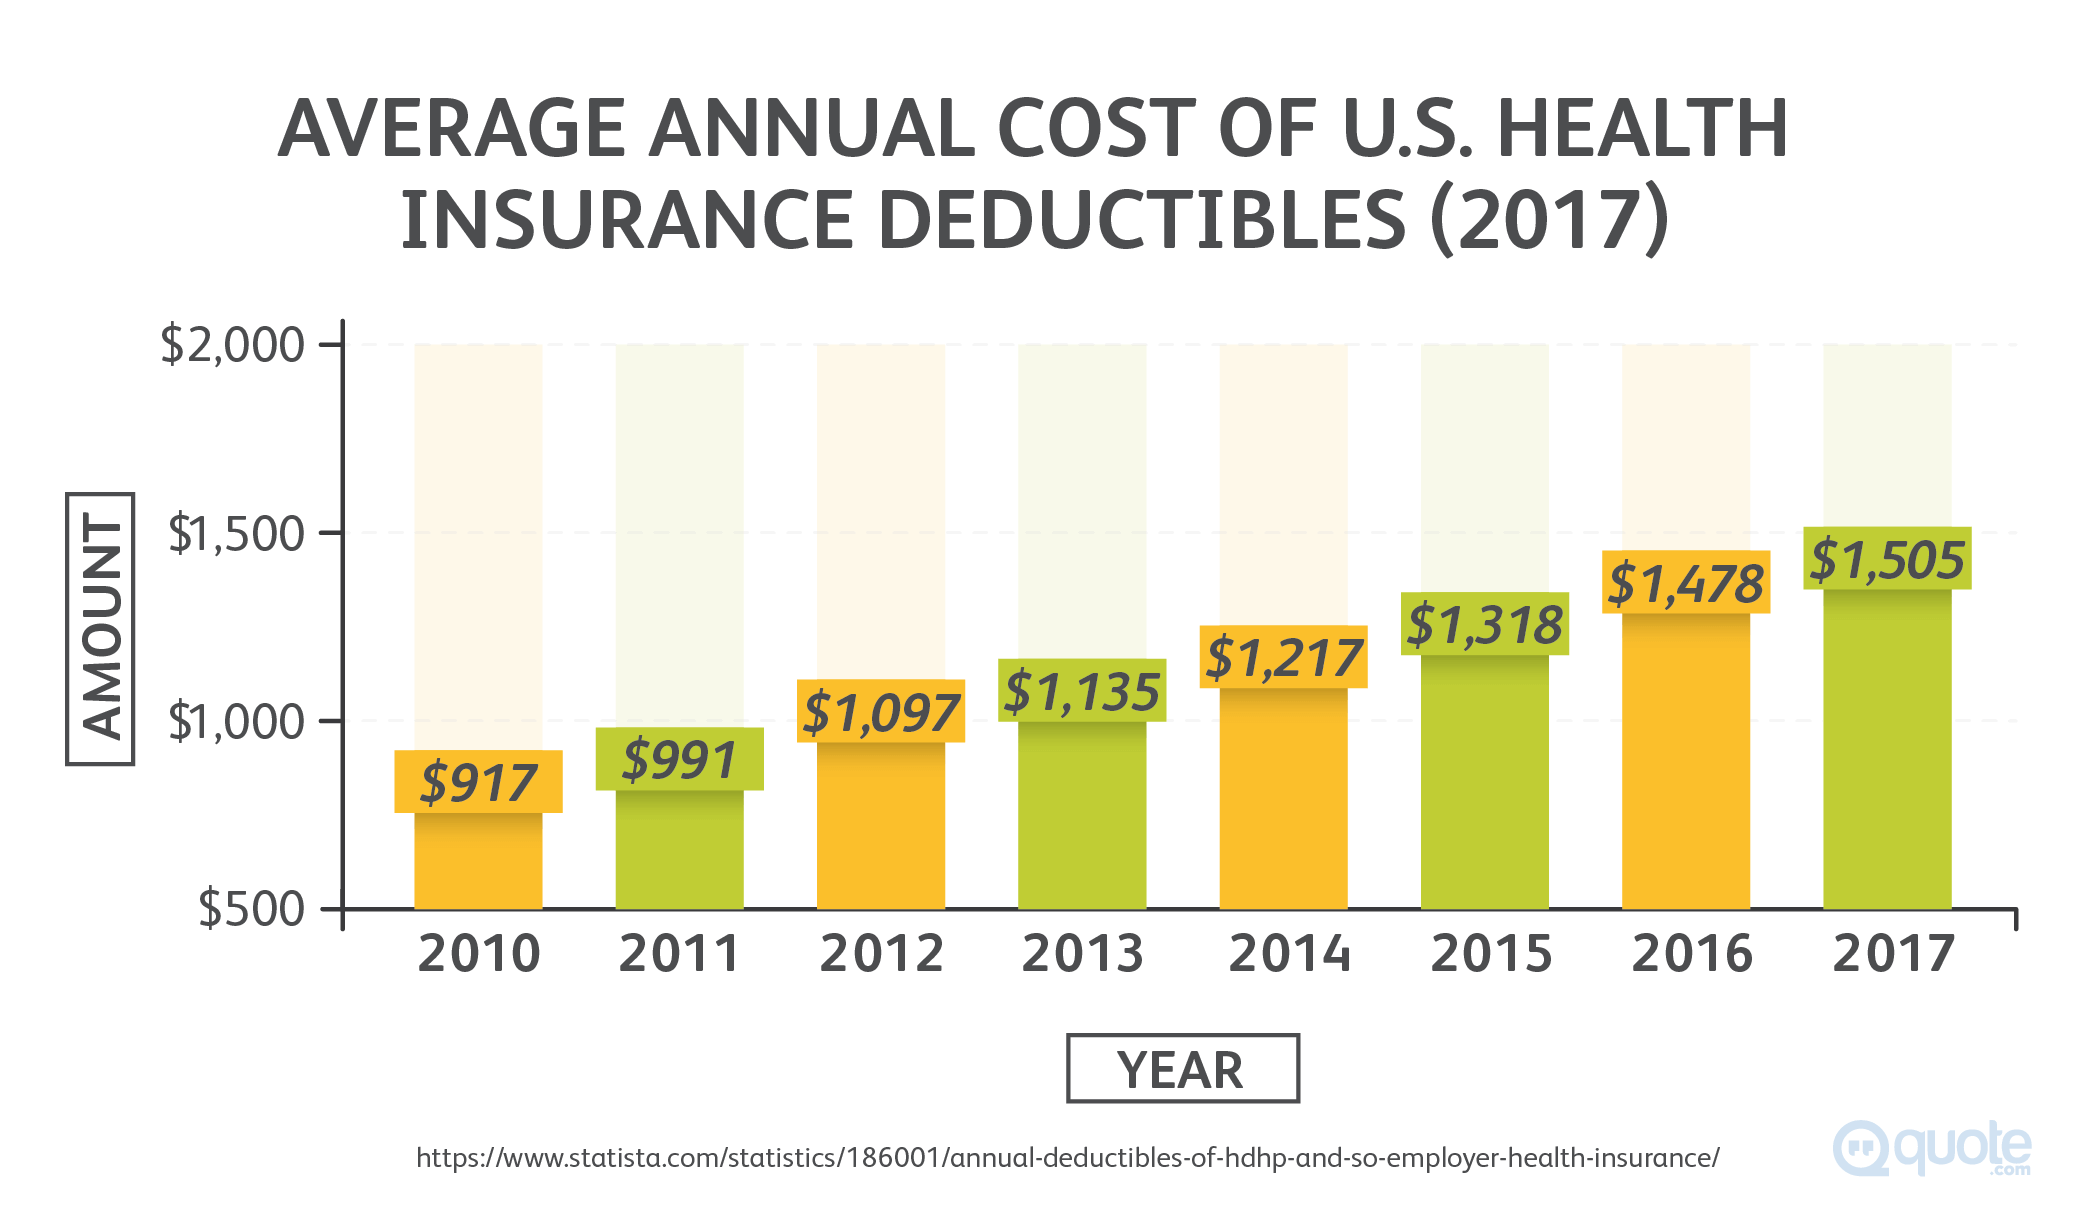 Annual Cost of U.S. Health Insurance Deductibles from 2010-2017